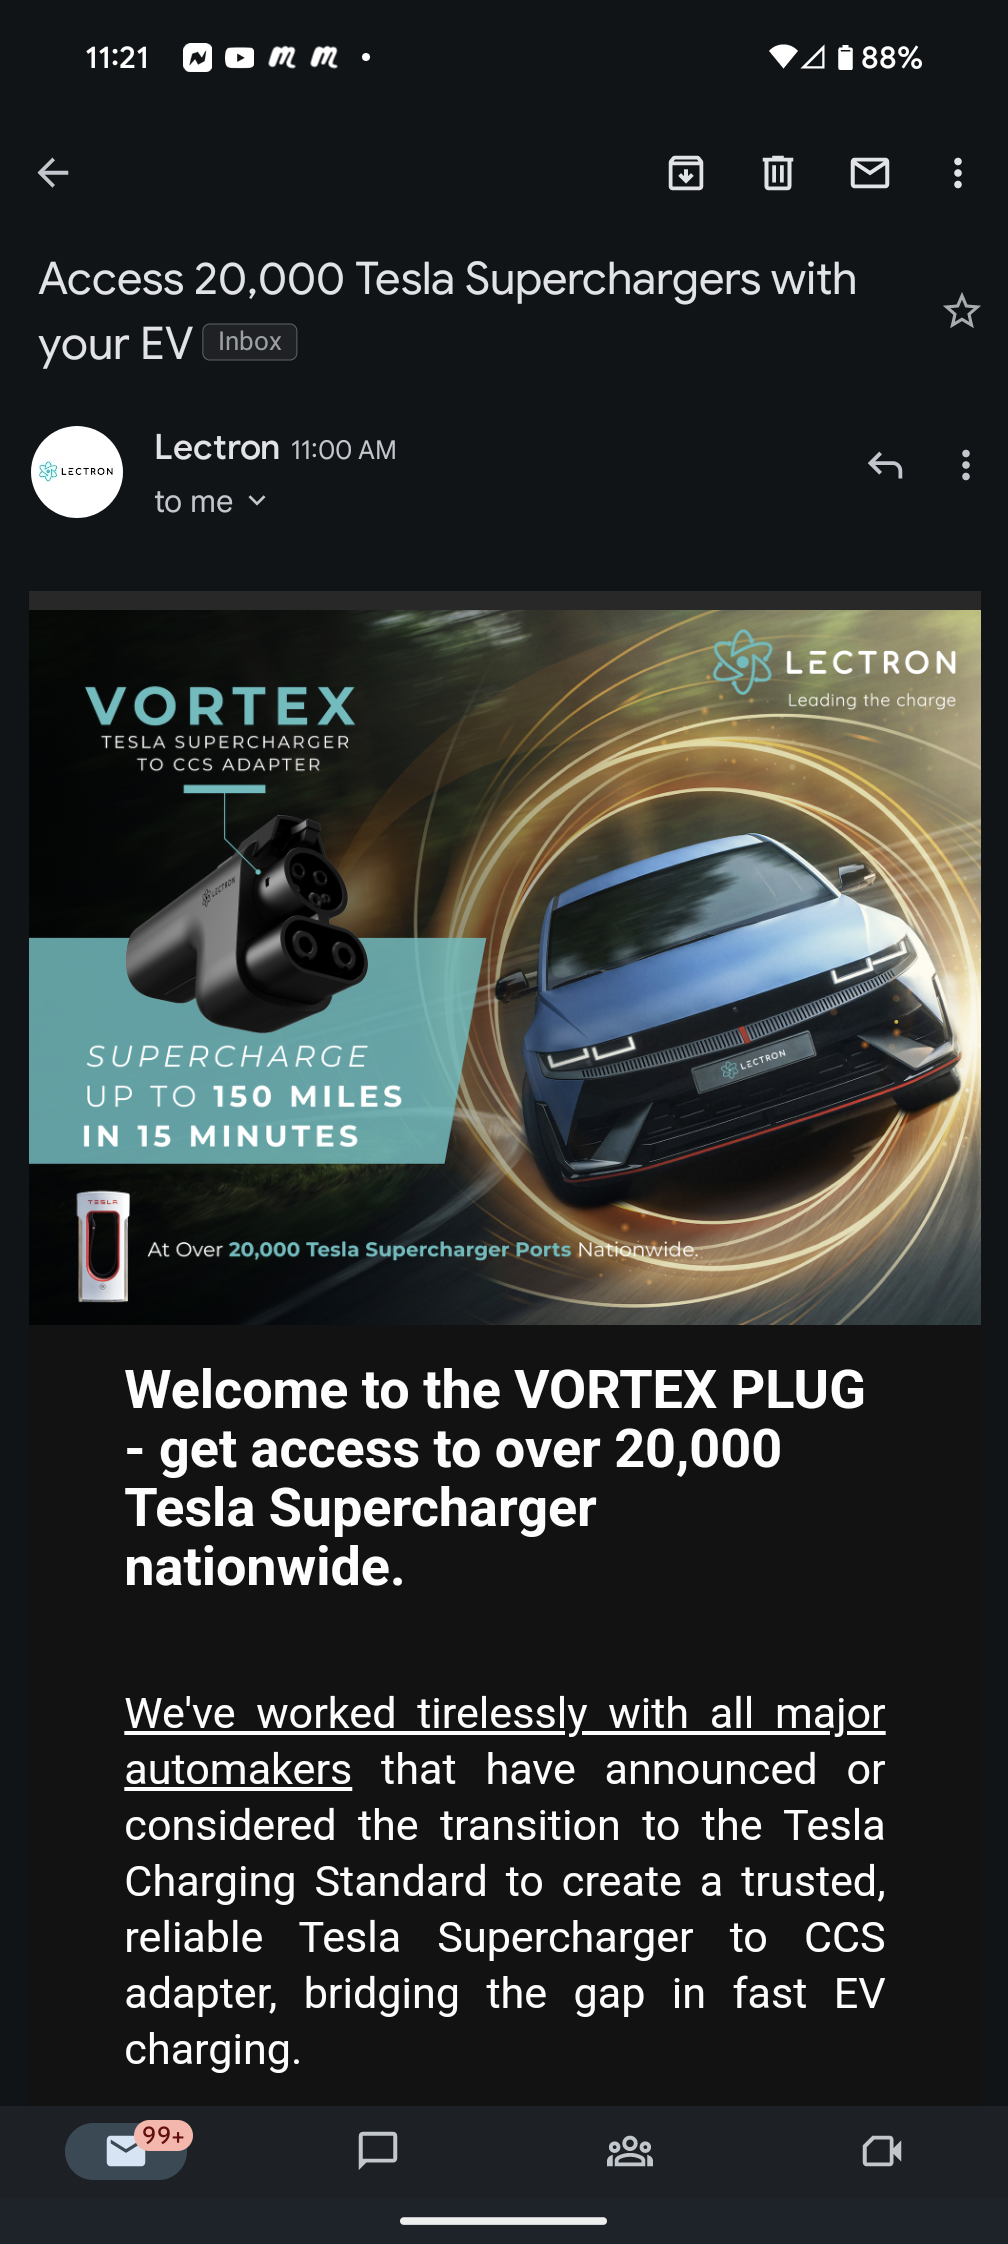 Lectron Vortex Plug: CCS Adapter for Tesla Chargers 